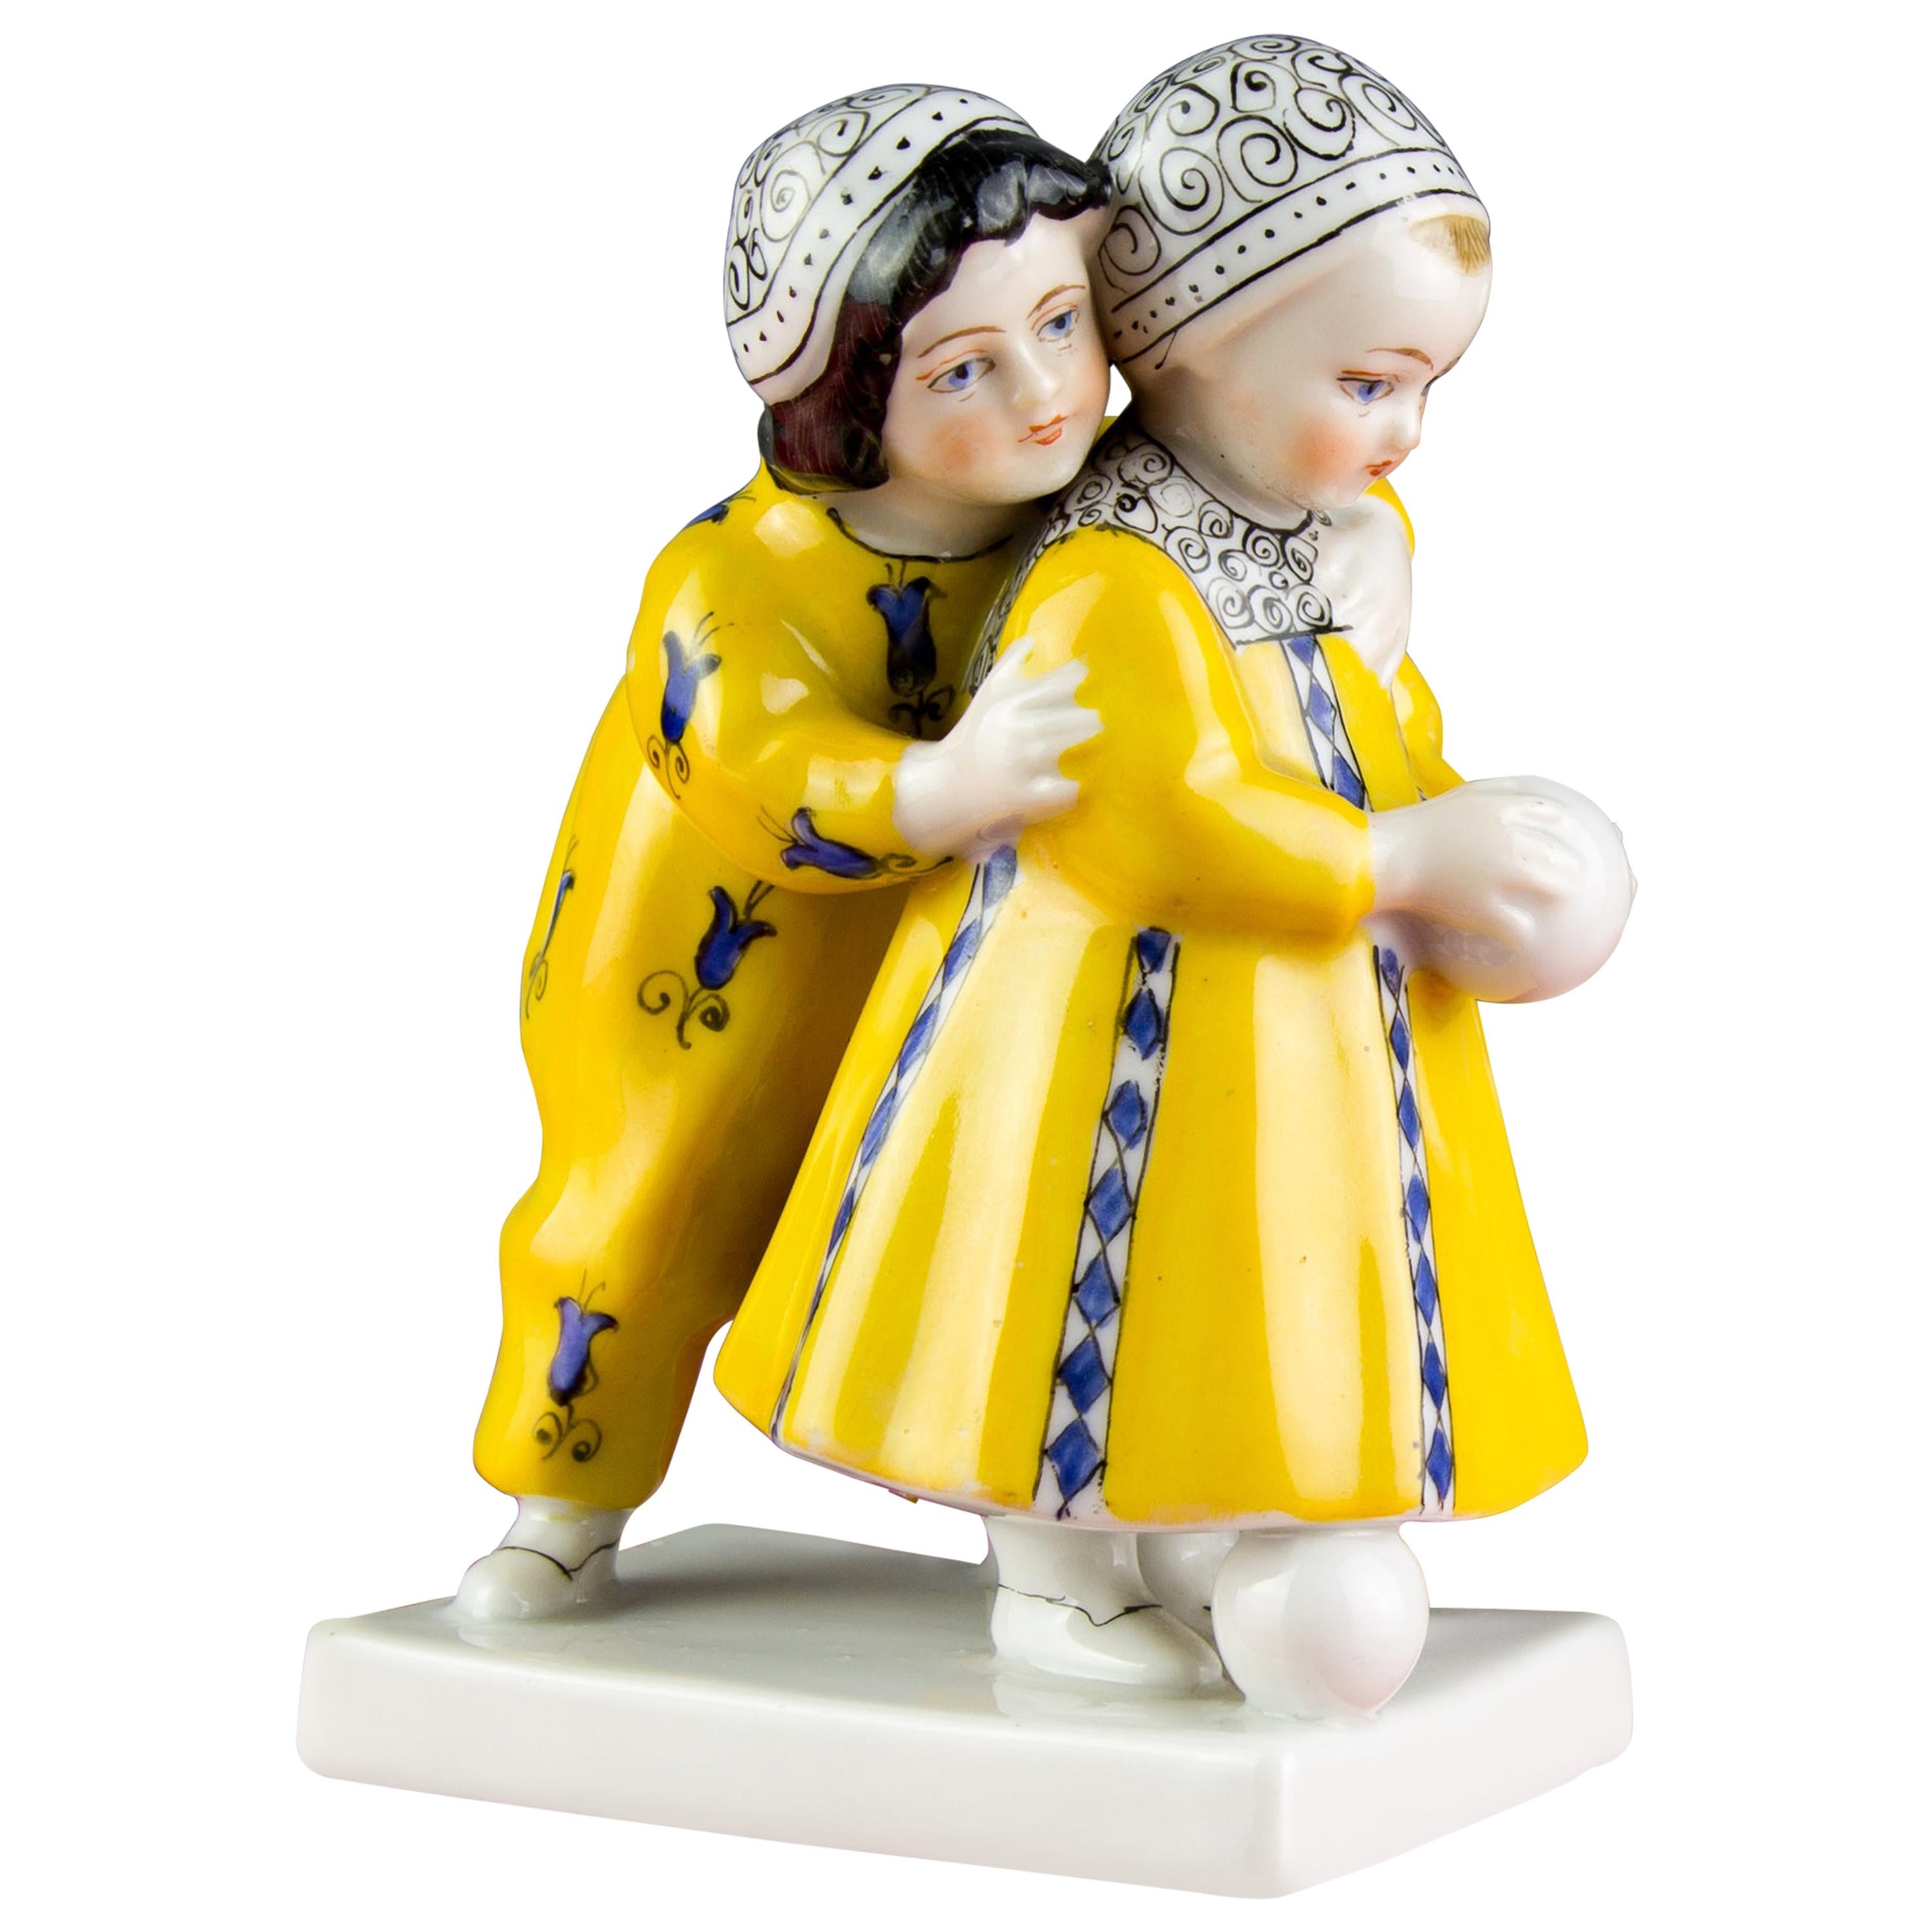 Art Deco Period Goebel Porcelain Figure Group of Two Children with Ball, 1920s